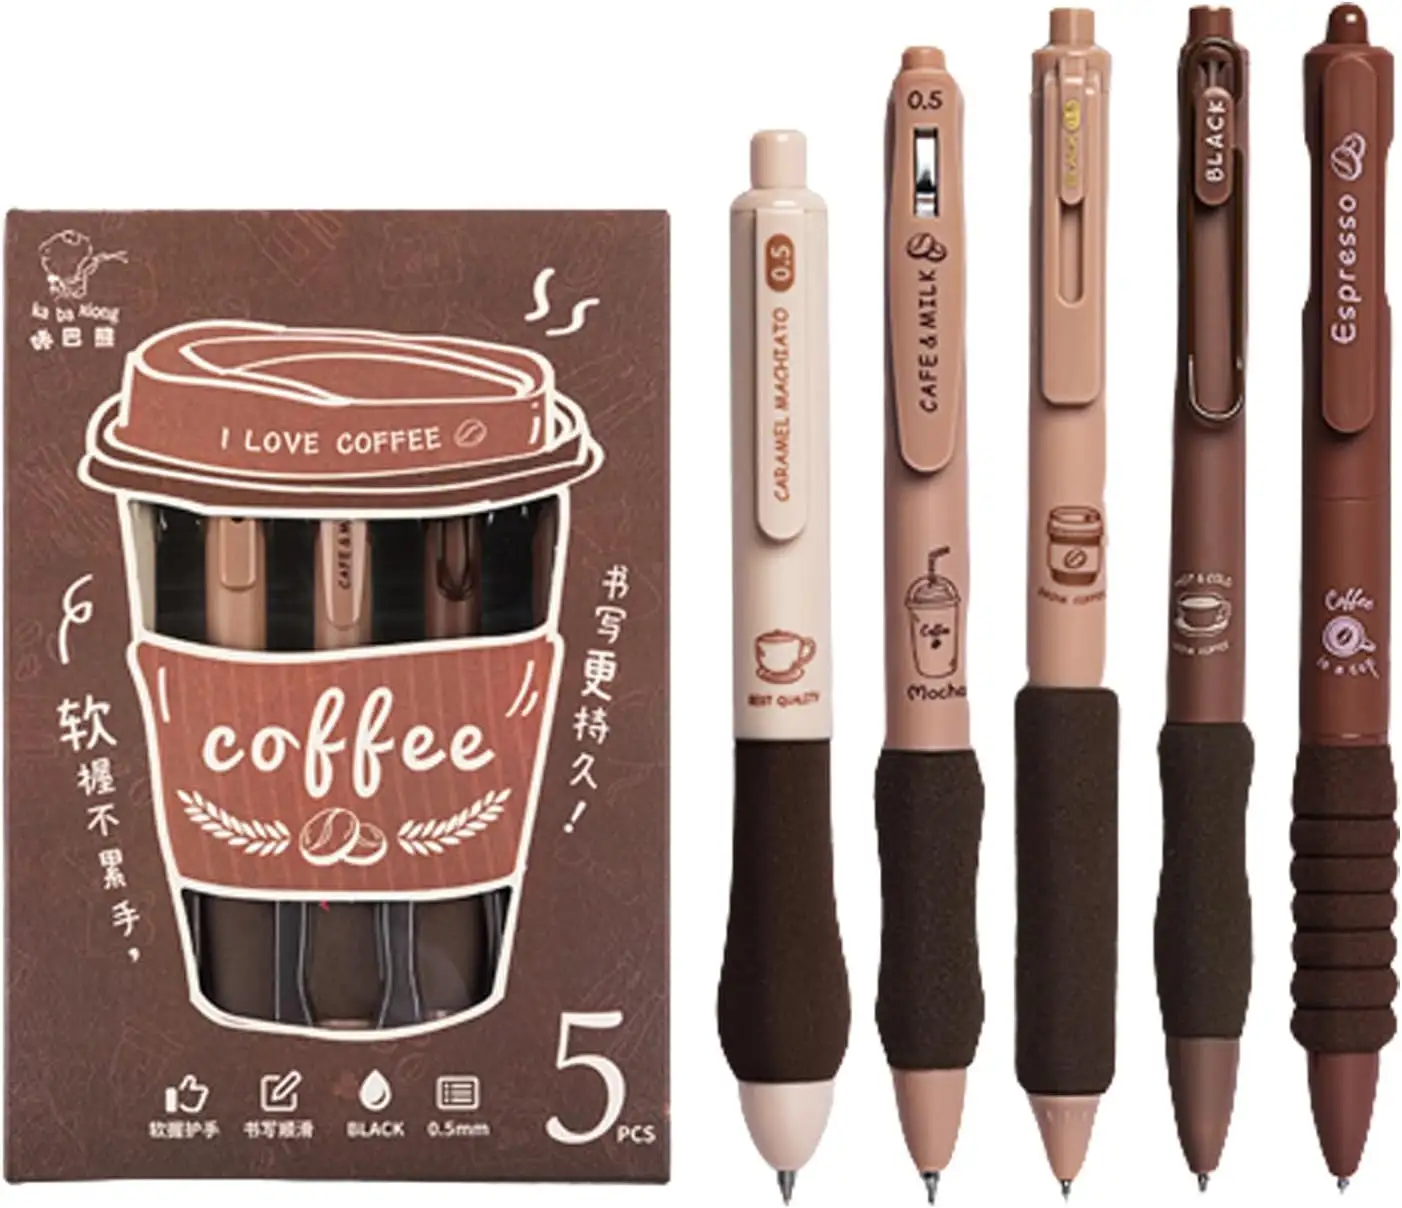 Cute Gel Ink Pens 5Pcs Coffee Cute Retractable Pens with Different Tips Quick Dry Ink Smooth Writing Ideal for School, Office